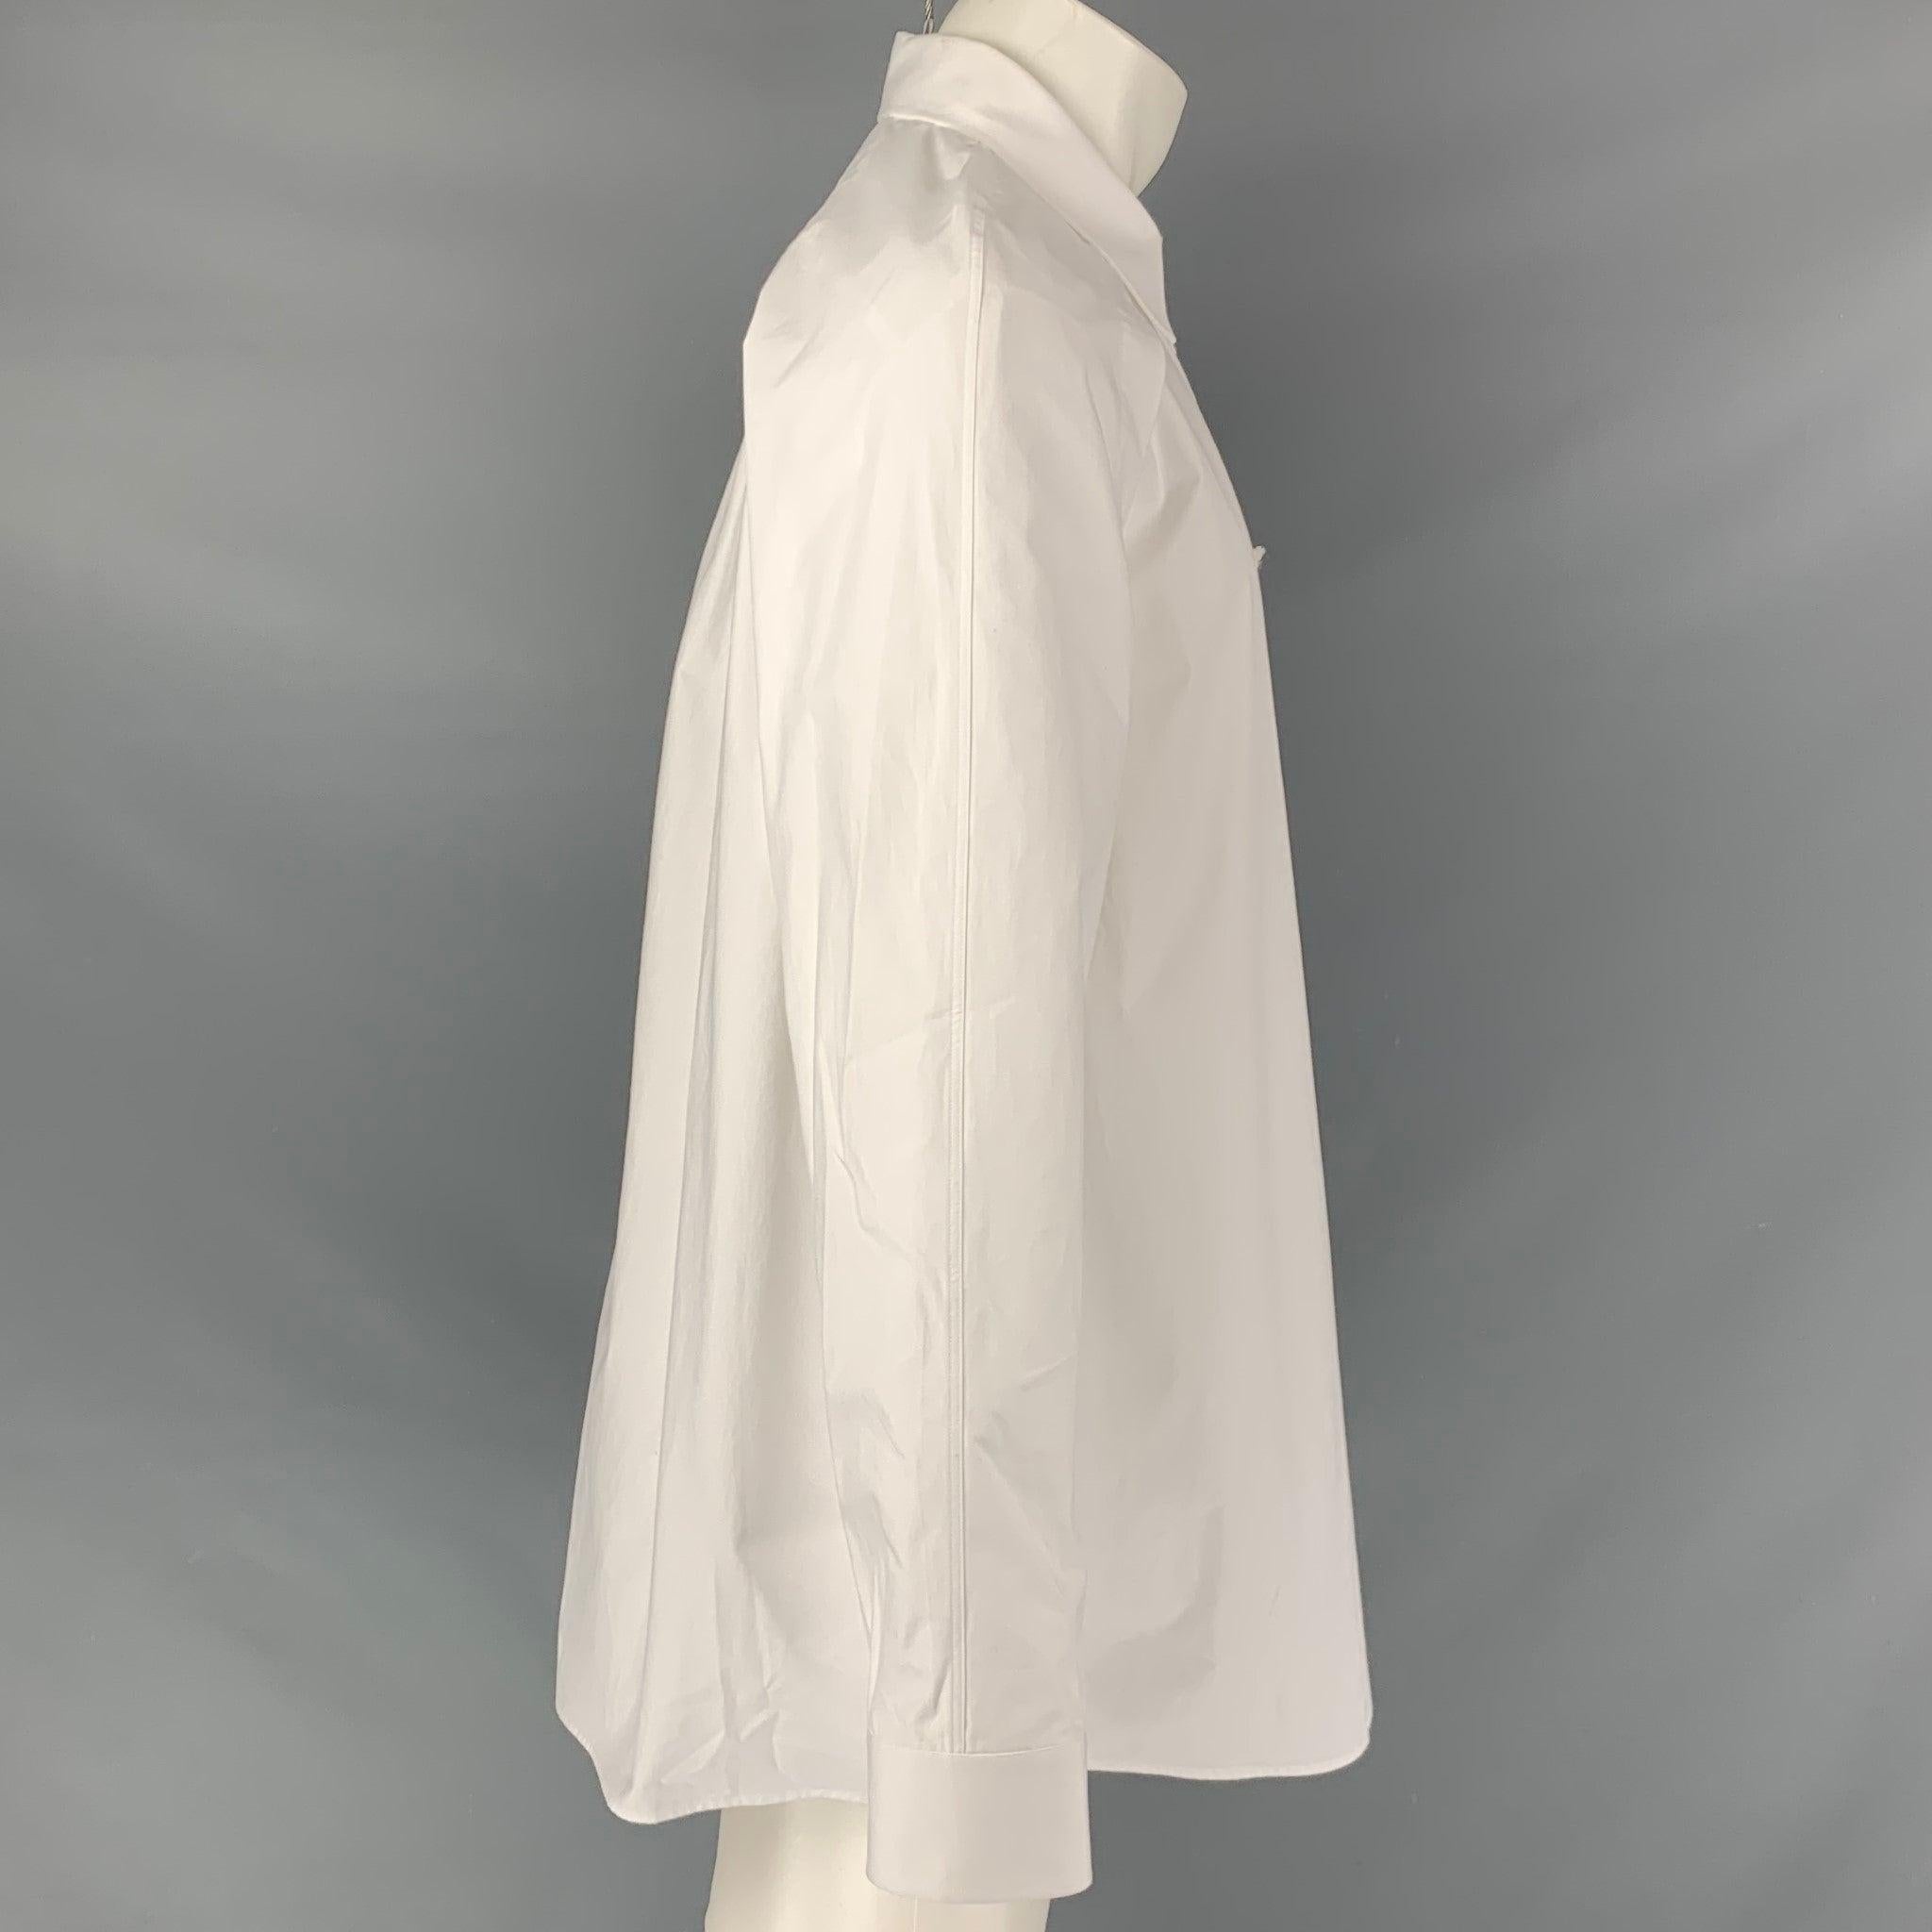 VALENTINO long sleeve shirt comes in a white cotton fabric featuring a double layer, straight collar top layer, banded collar at bottom layer, and a button down closure. Made in Italy.New with Tags. Minor mark at left cuff. 

Marked:   40- 15 3/4